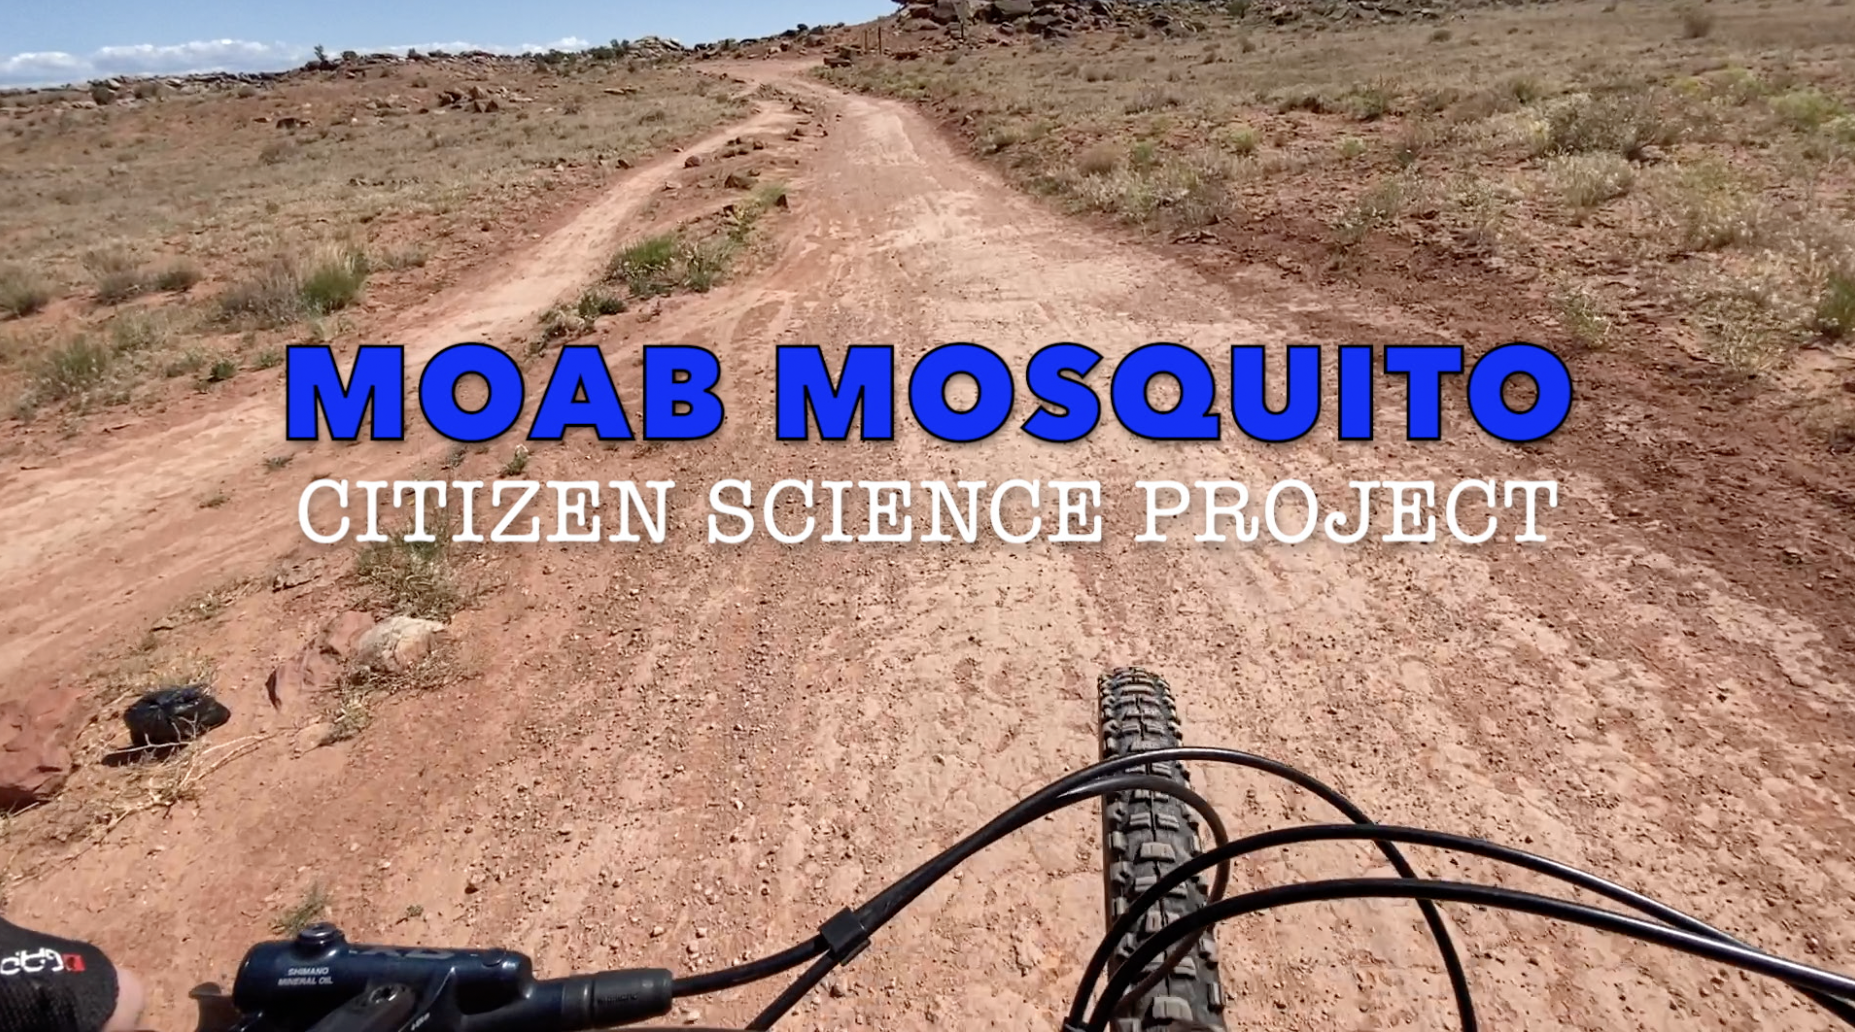 Moab Mosquito Outreach project